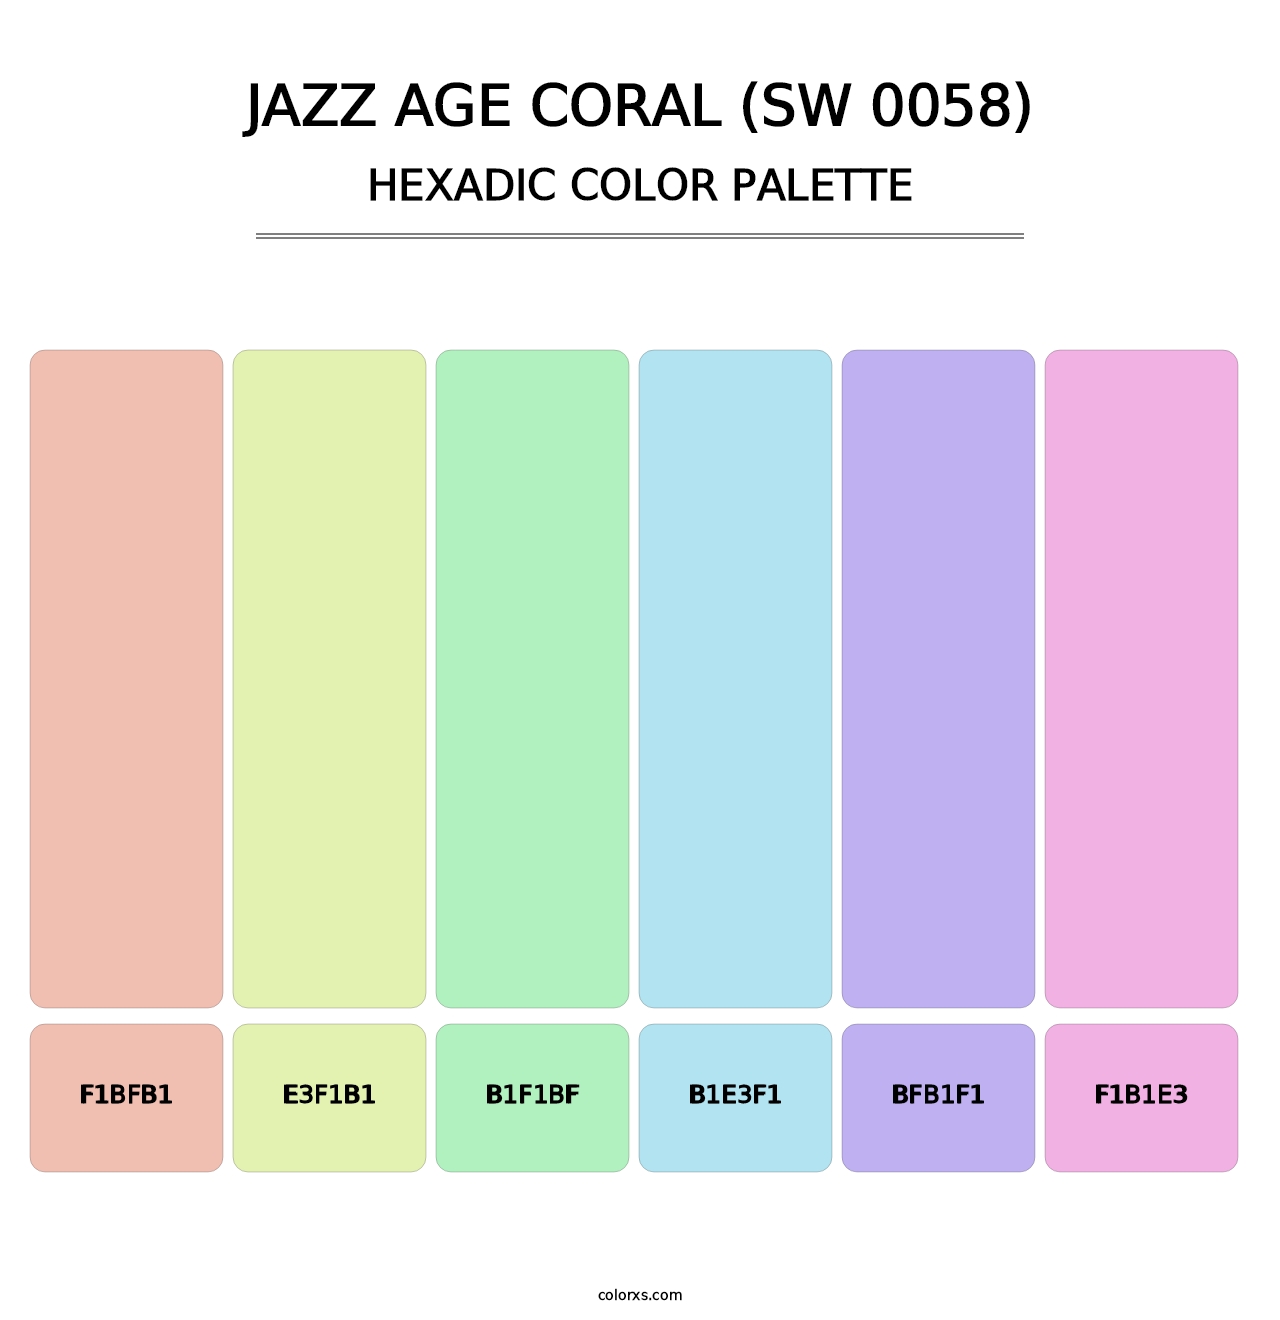 Jazz Age Coral (SW 0058) - Hexadic Color Palette